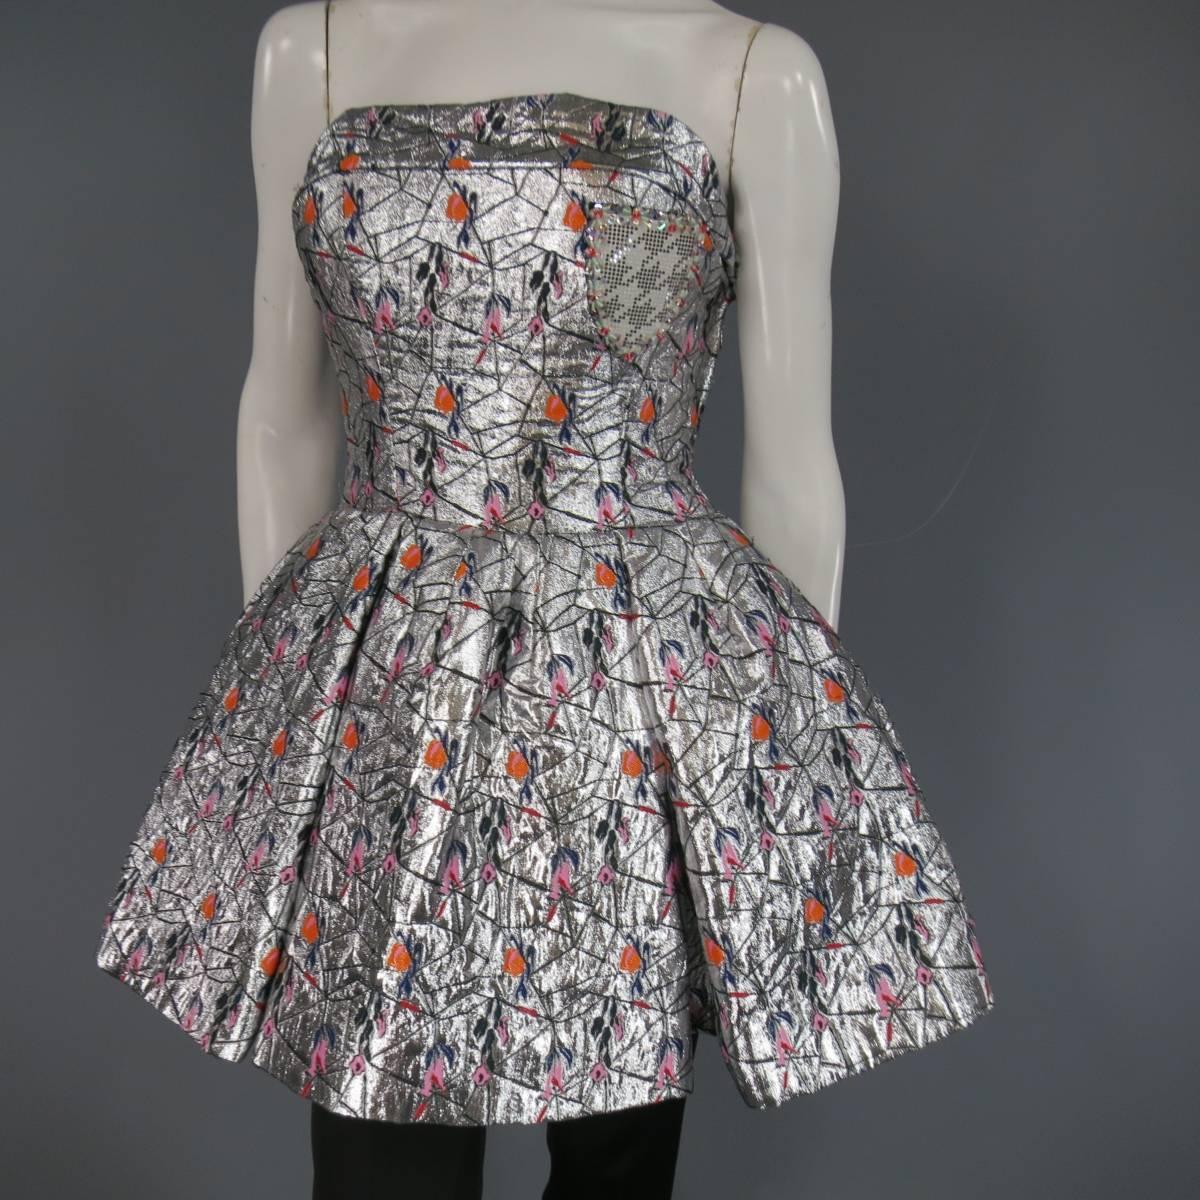 This fabulous CHRISTIAN DIOR Spring 2014 Collection strapless cocktail mini dress look comes in a structured metallic silver jacquard fabric with orange, red, & pink floral embroidery and features a built in bustier bodice with cuffed hem, box